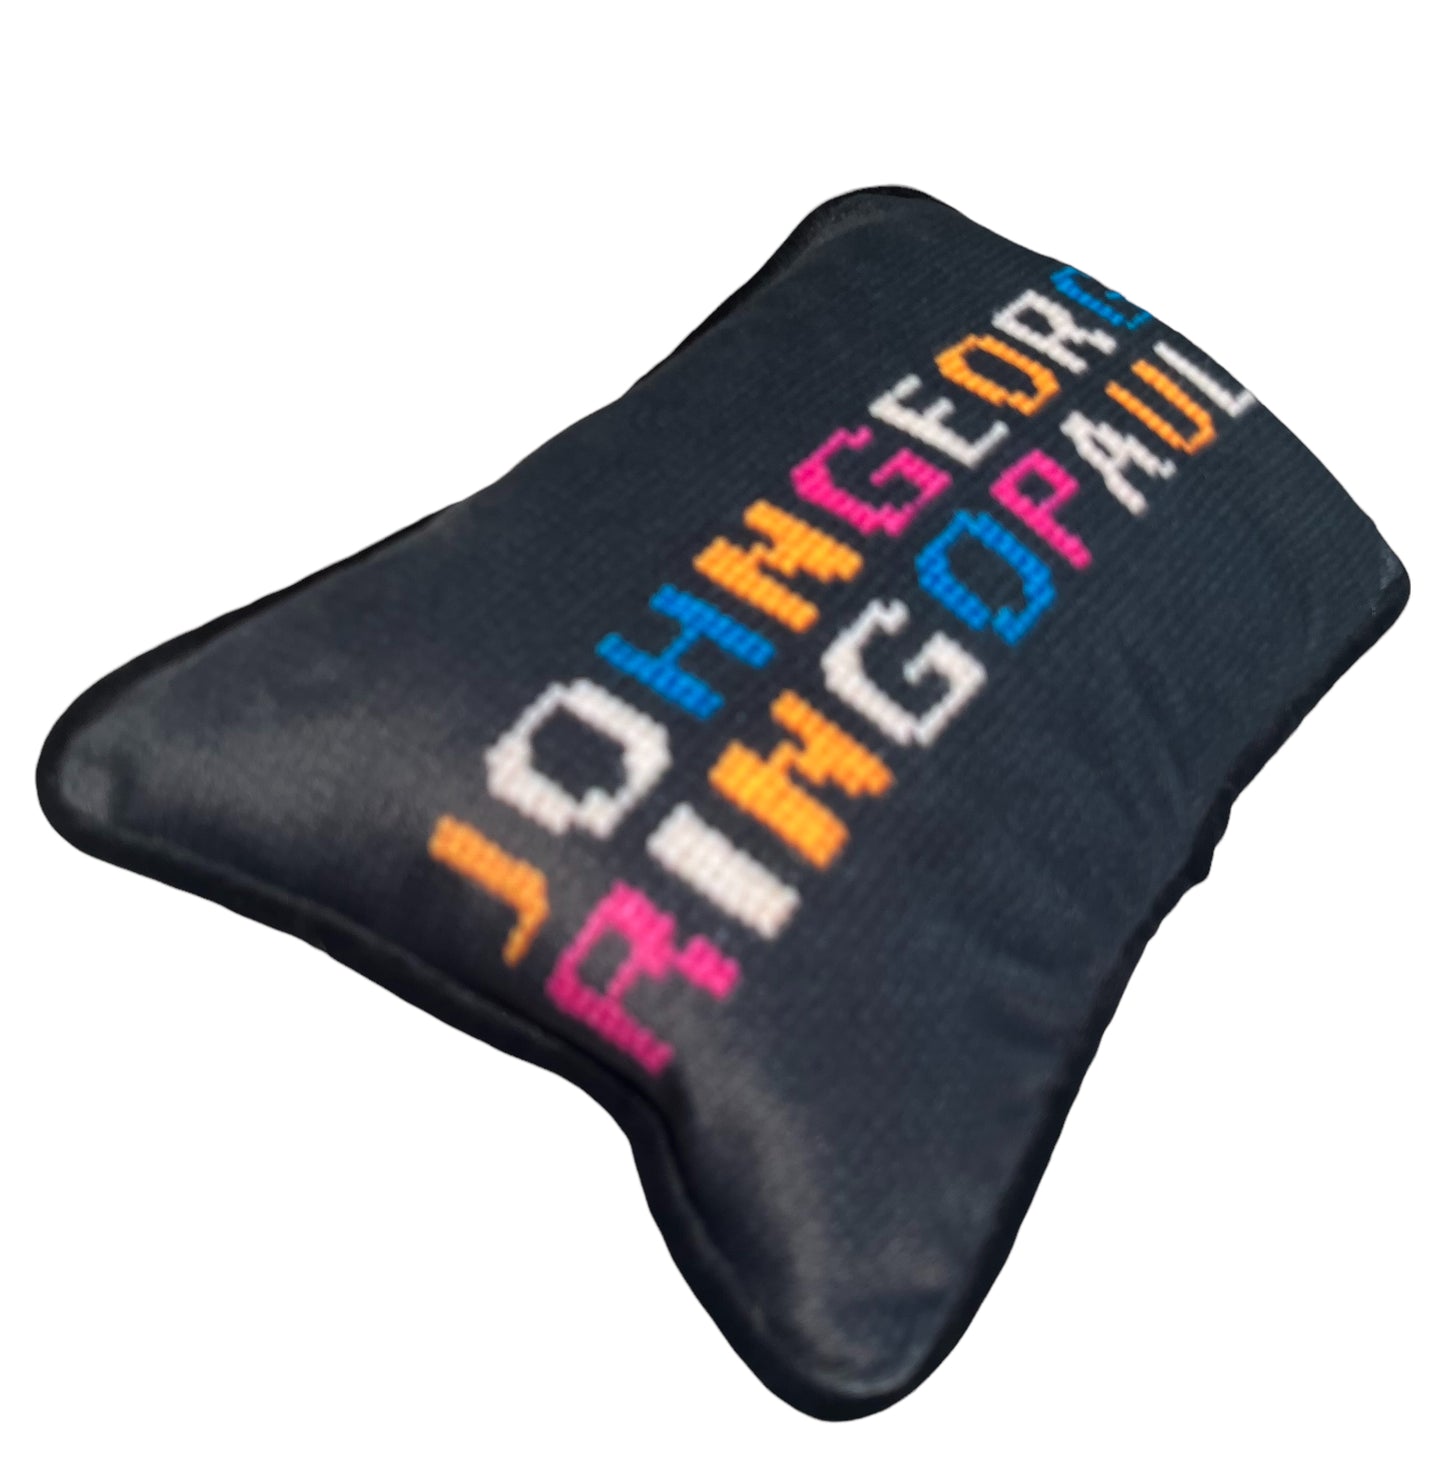 JOHNGEORGE on top line;  RINGOPAUL written in colorful yellow, white, blue and pink letters on solid black background.  The Beatles pillow.